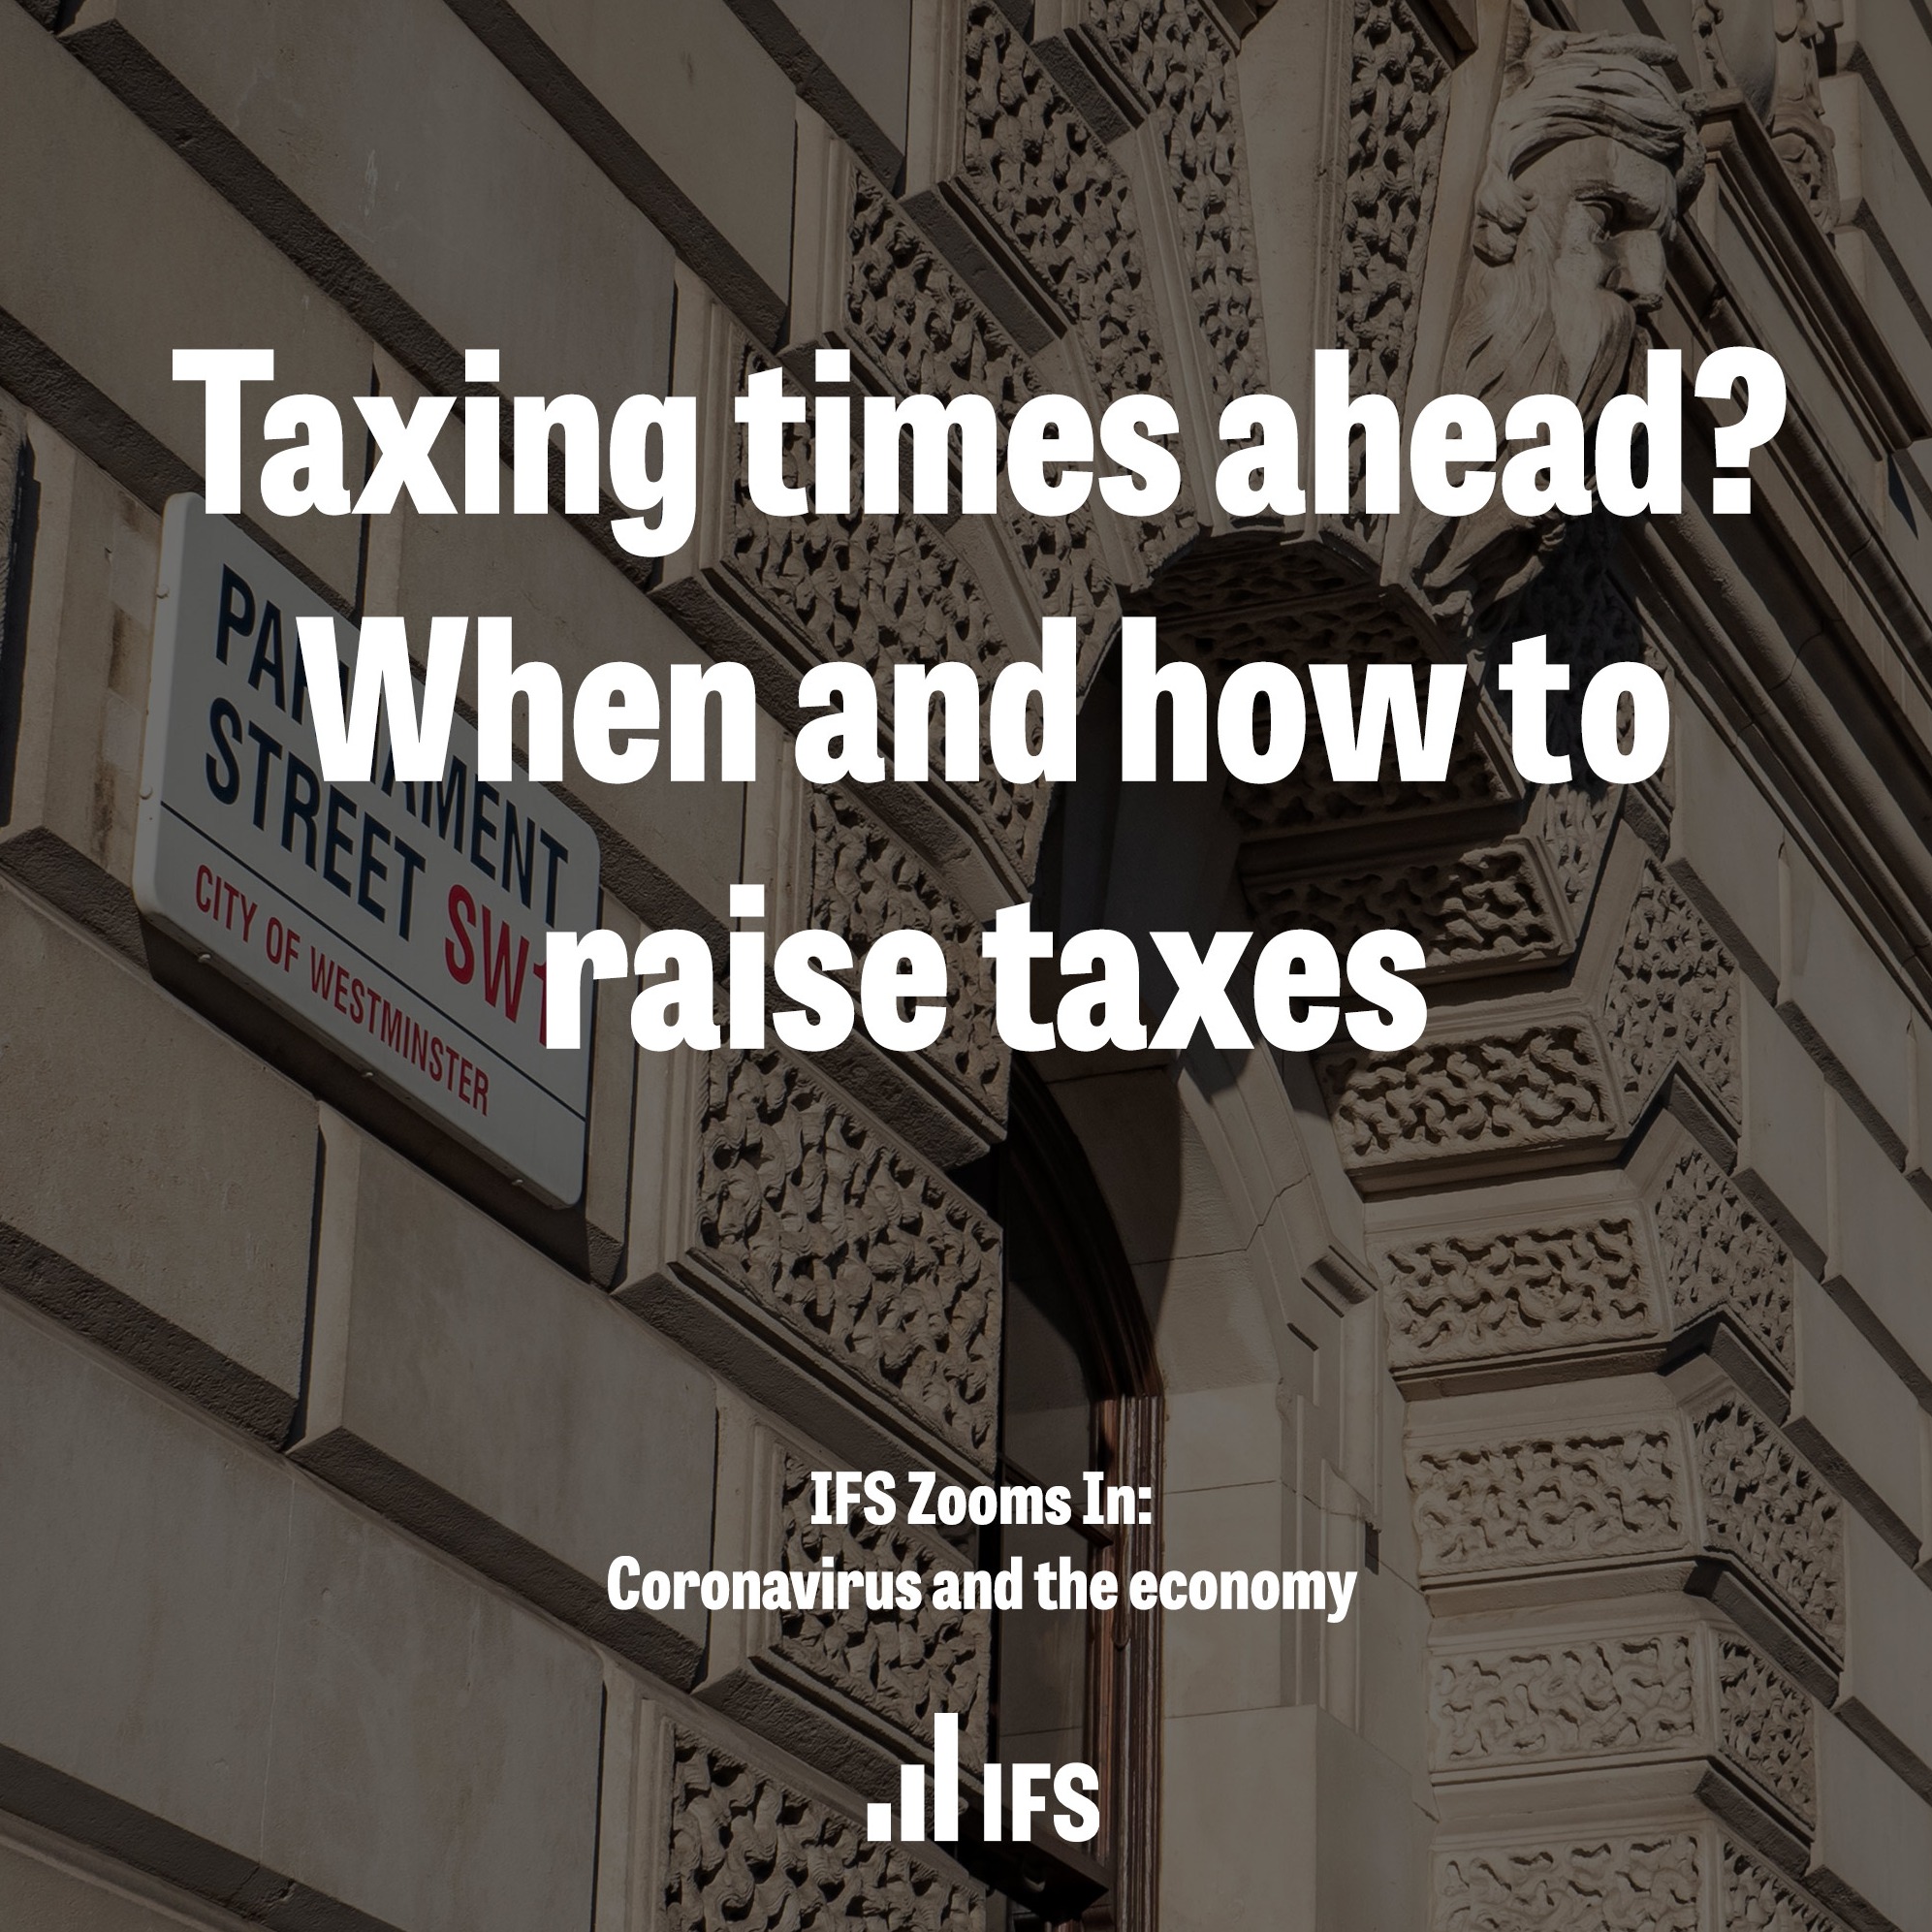 Taxing times ahead? When and how to raise taxes